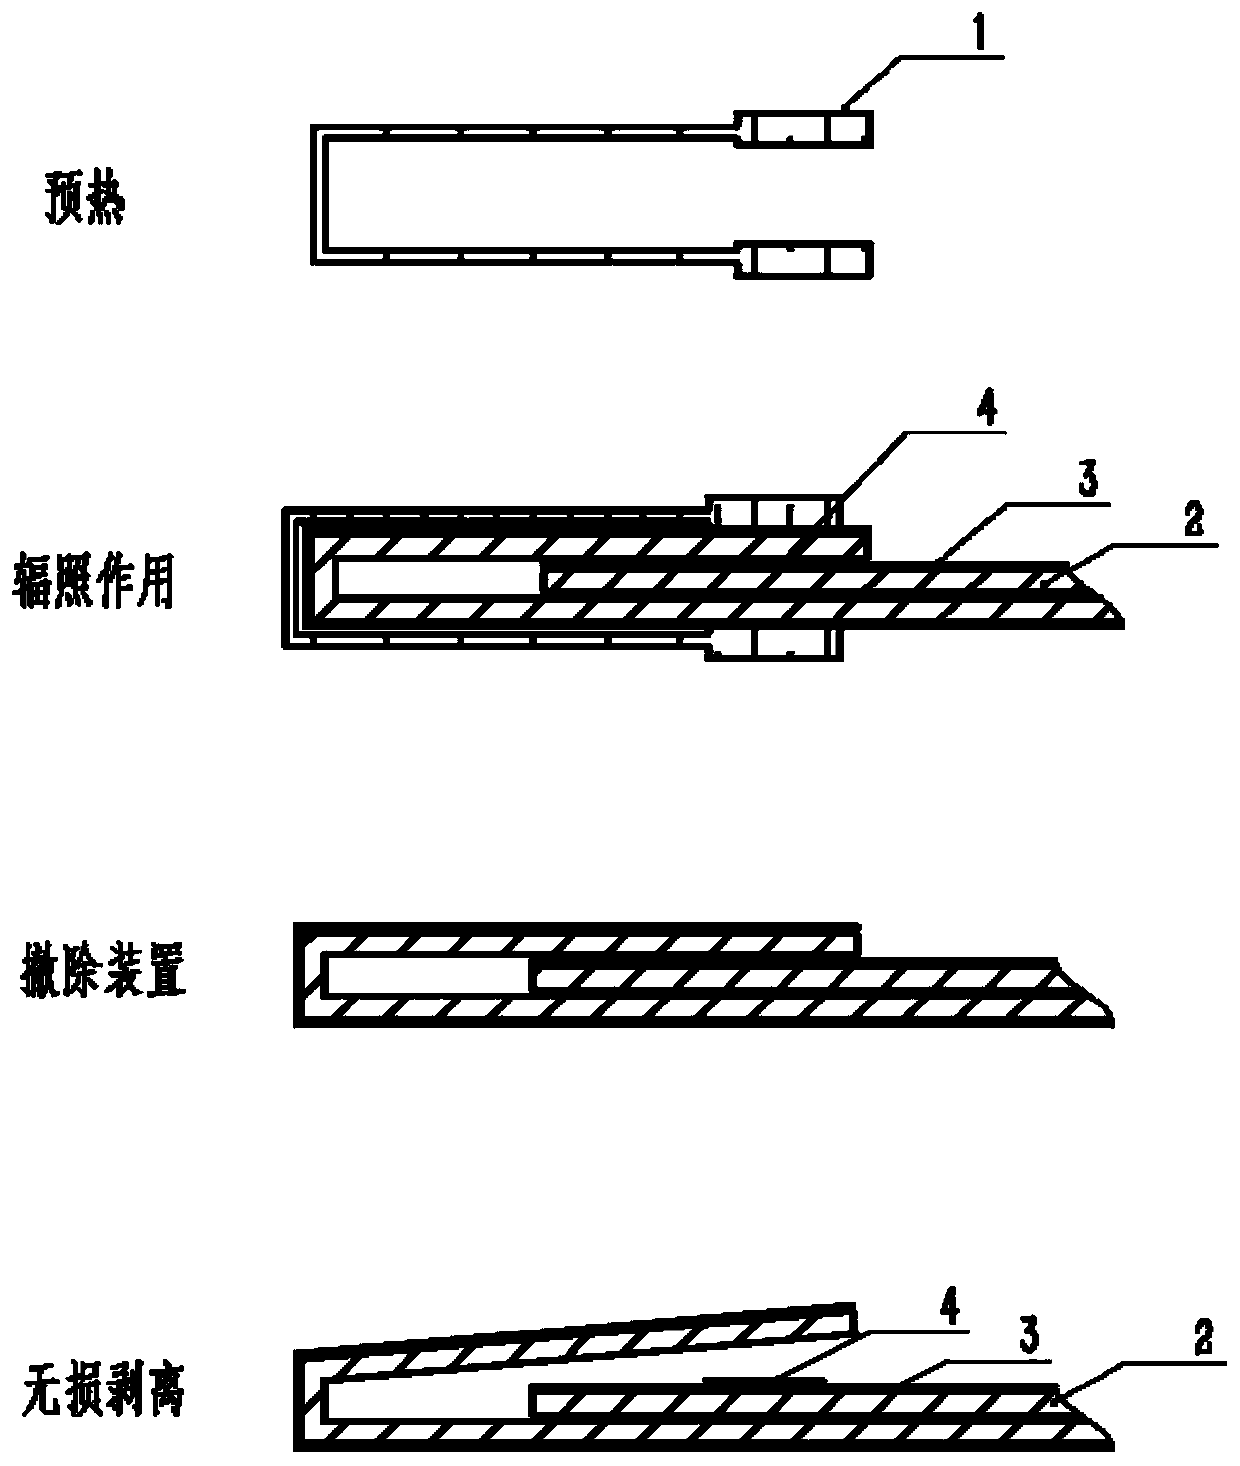 Method for making film-coated hard paper double-faced adhesive tape seal fail without damage